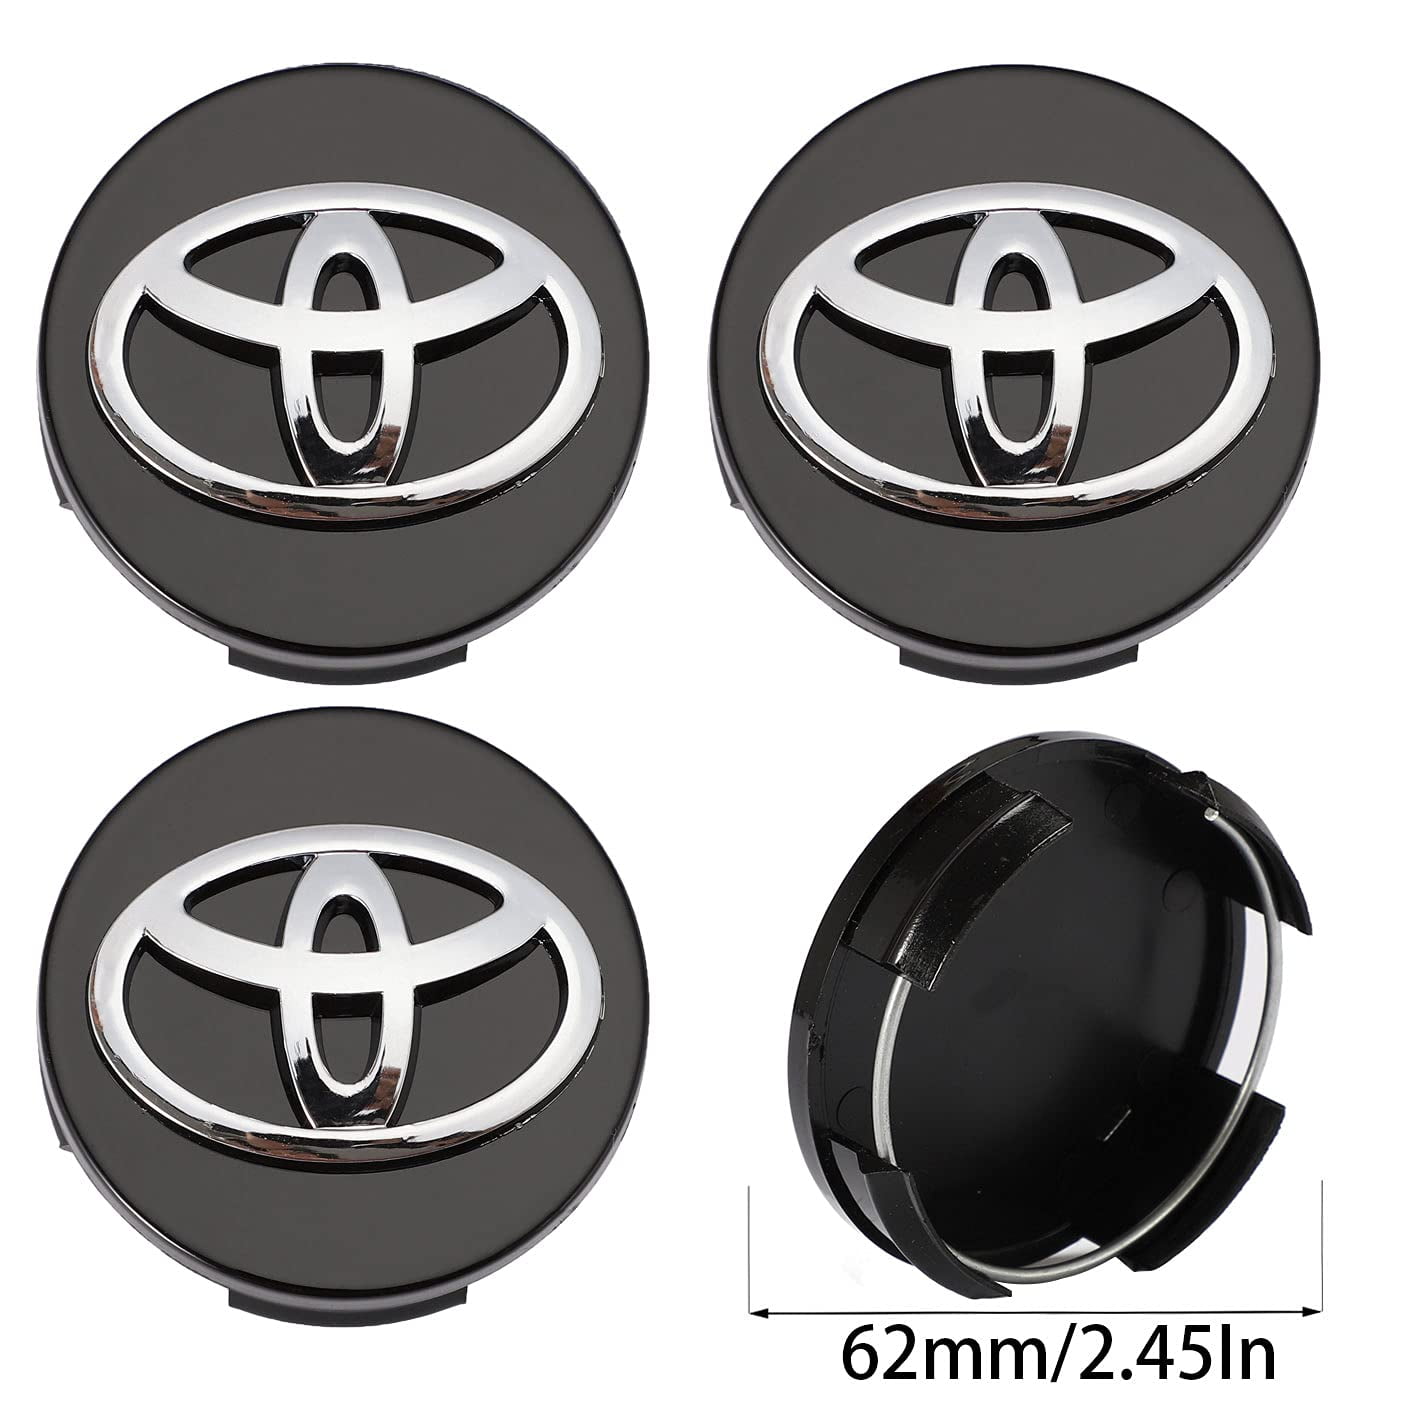 S-62LGG-Toyota-1 4 Pack Silver 62mm/ 2.44 inch fit Toyota Wheel Center Hub Caps,Hubcaps Logo Covers for Toyota 